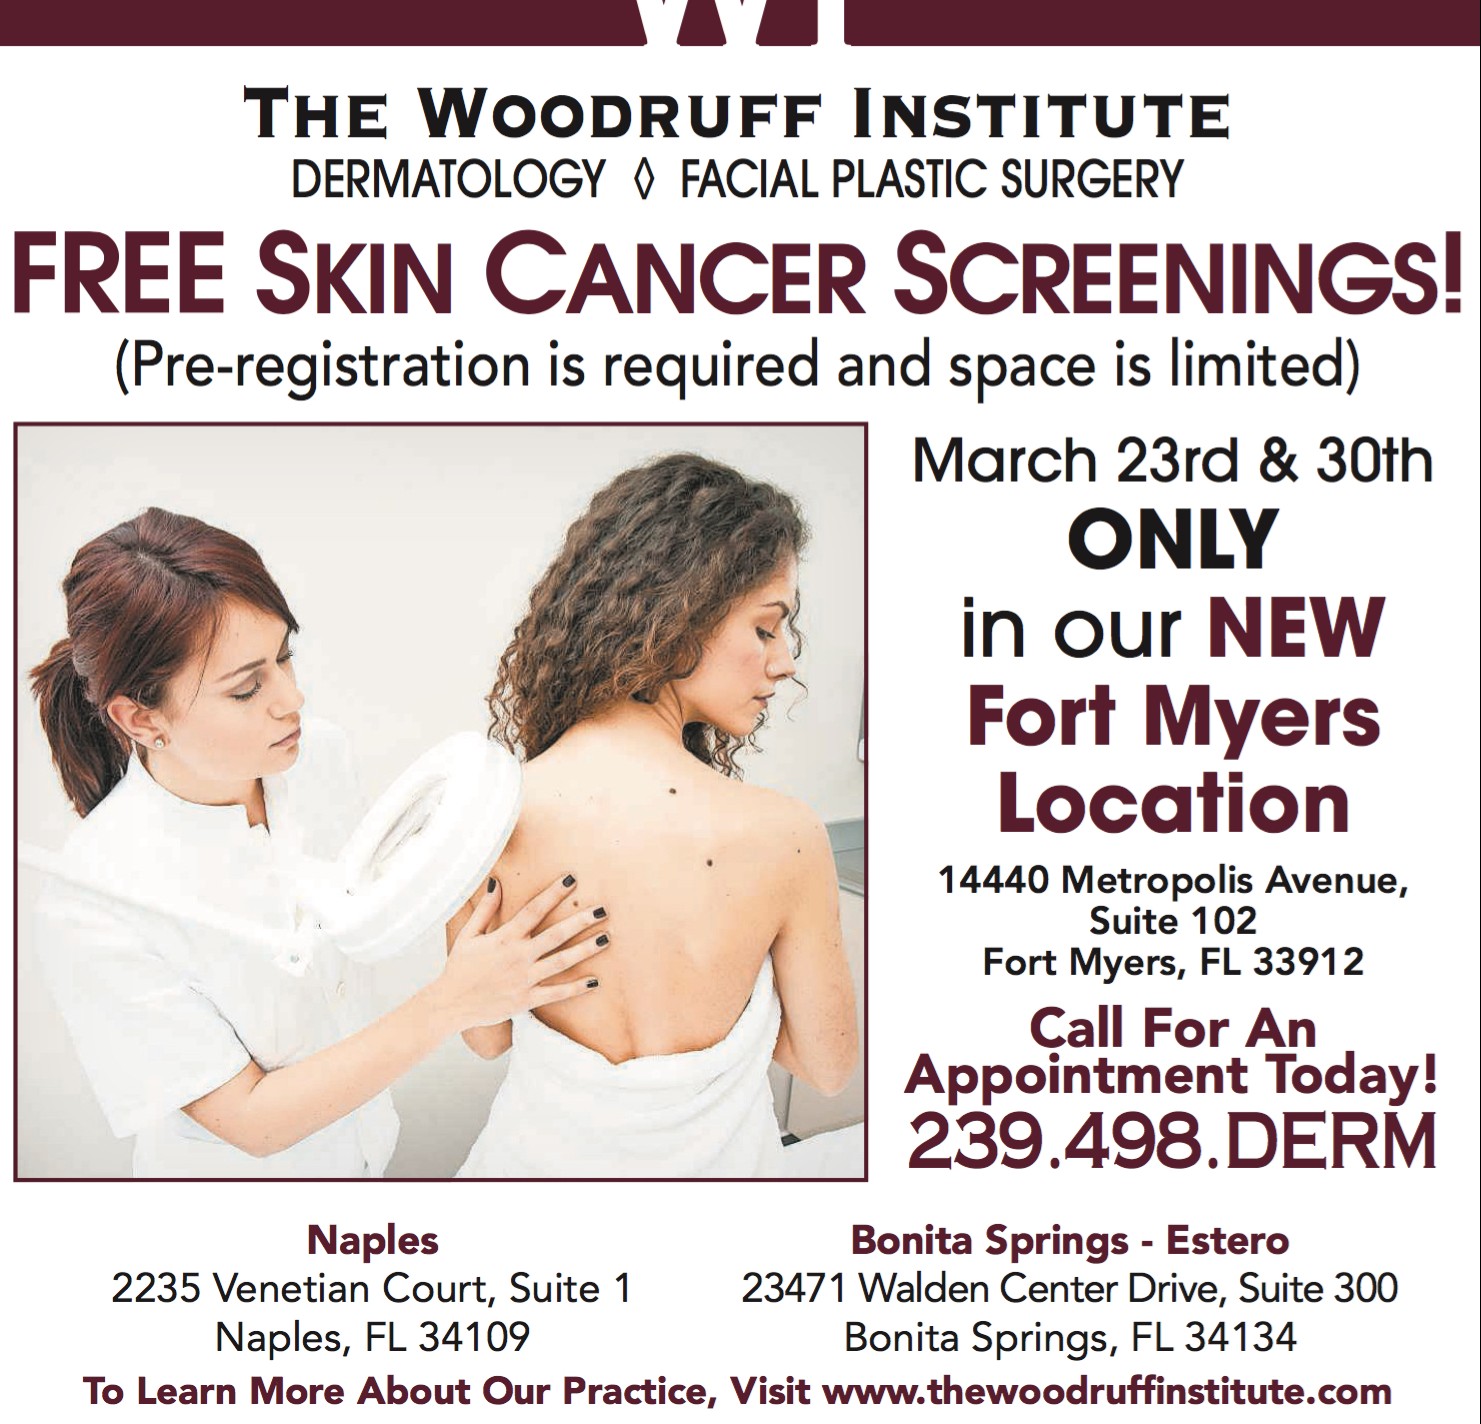 FREE skin cancer screenings in our Fort Myers office!